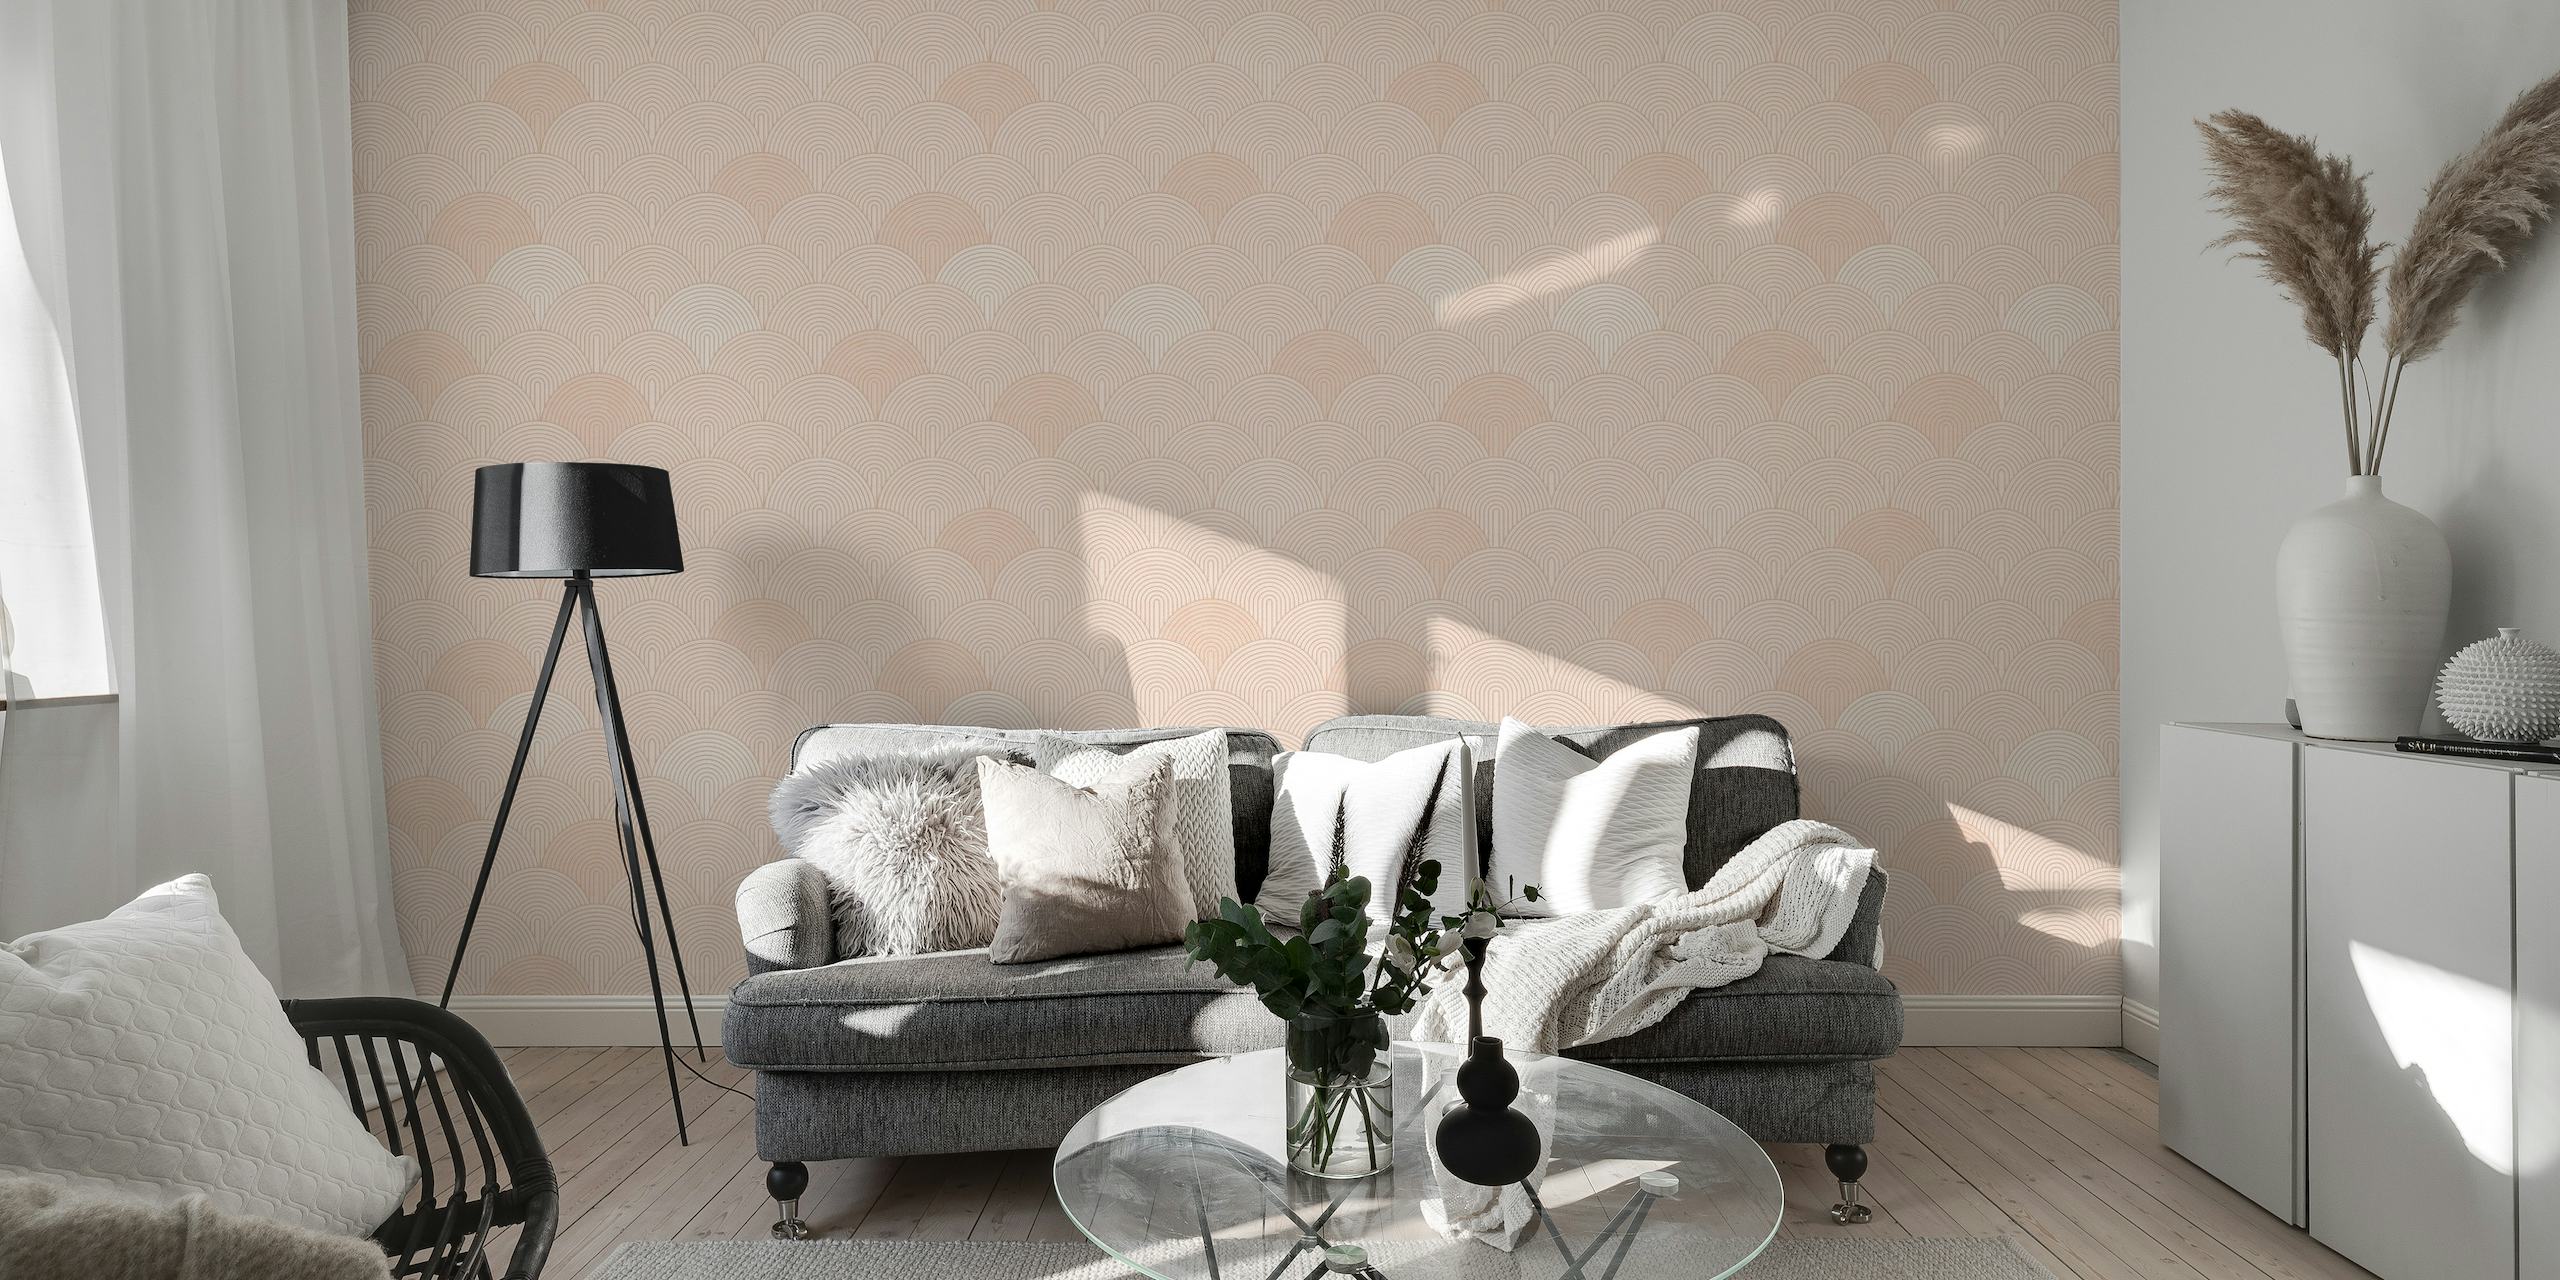 Boho geo arches pattern in peach fuzz color for a serene wall mural design